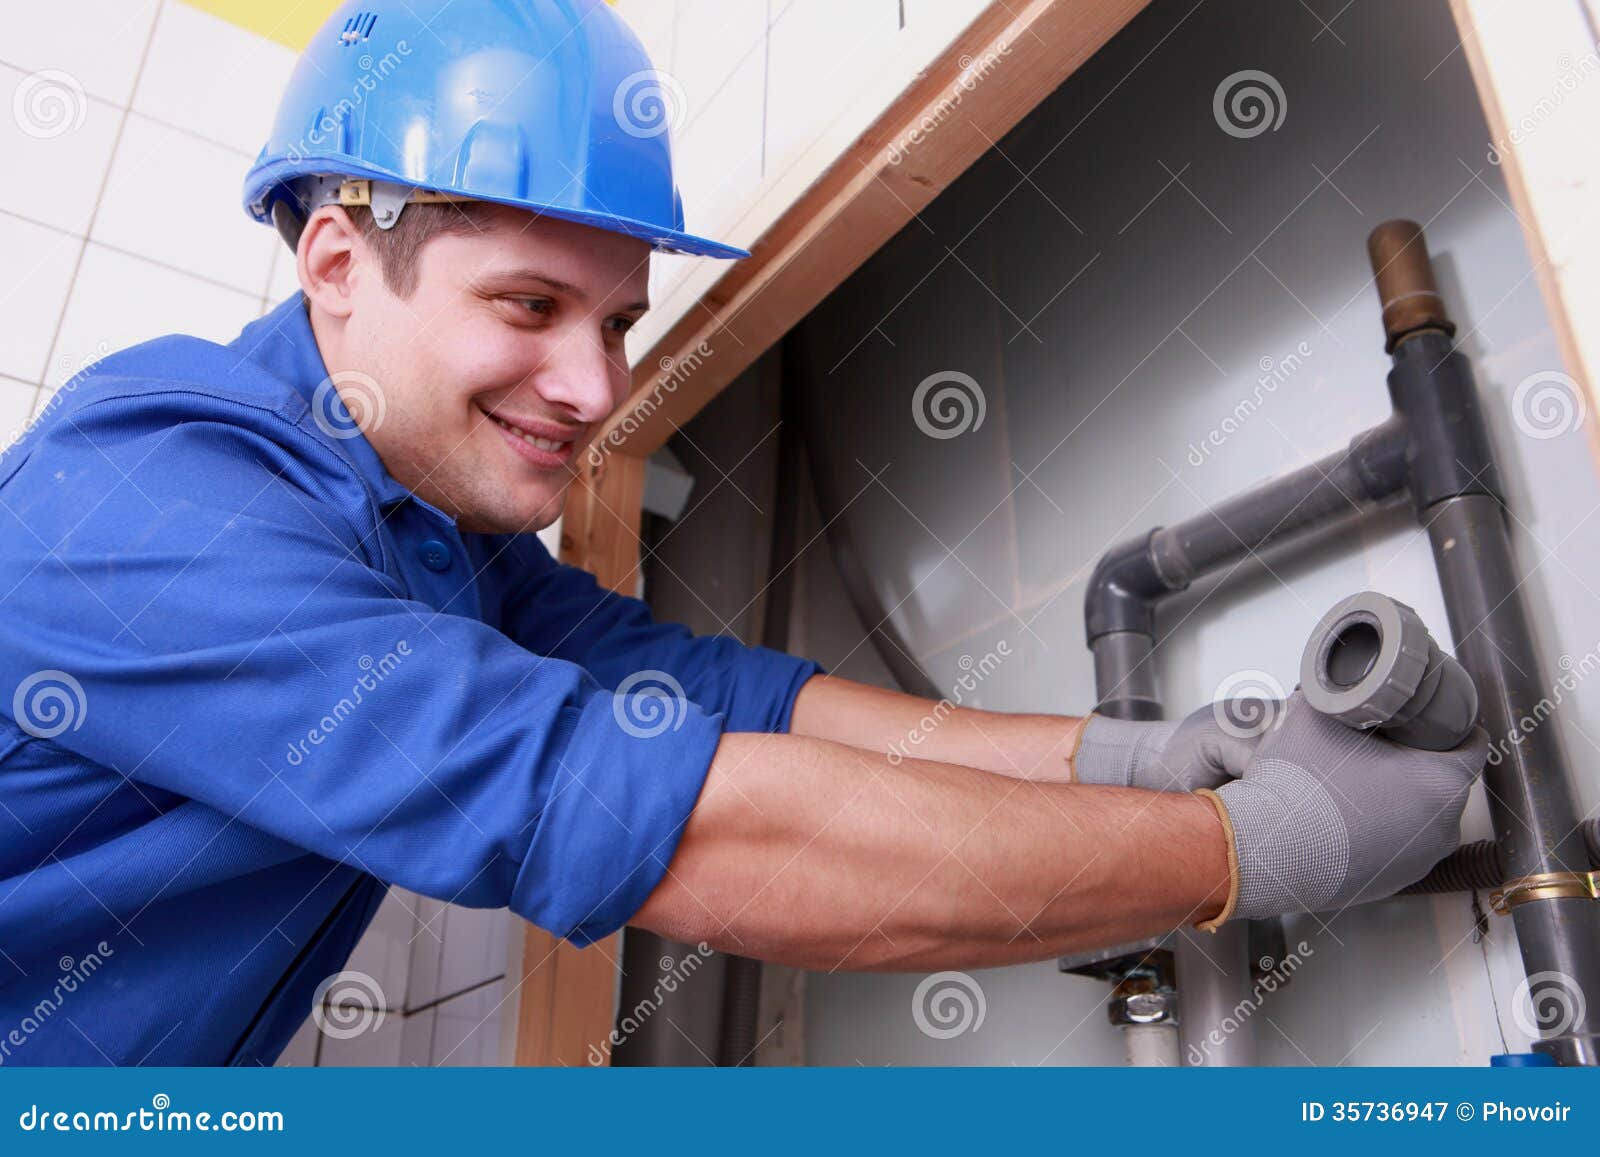 plumber fitting water pipes